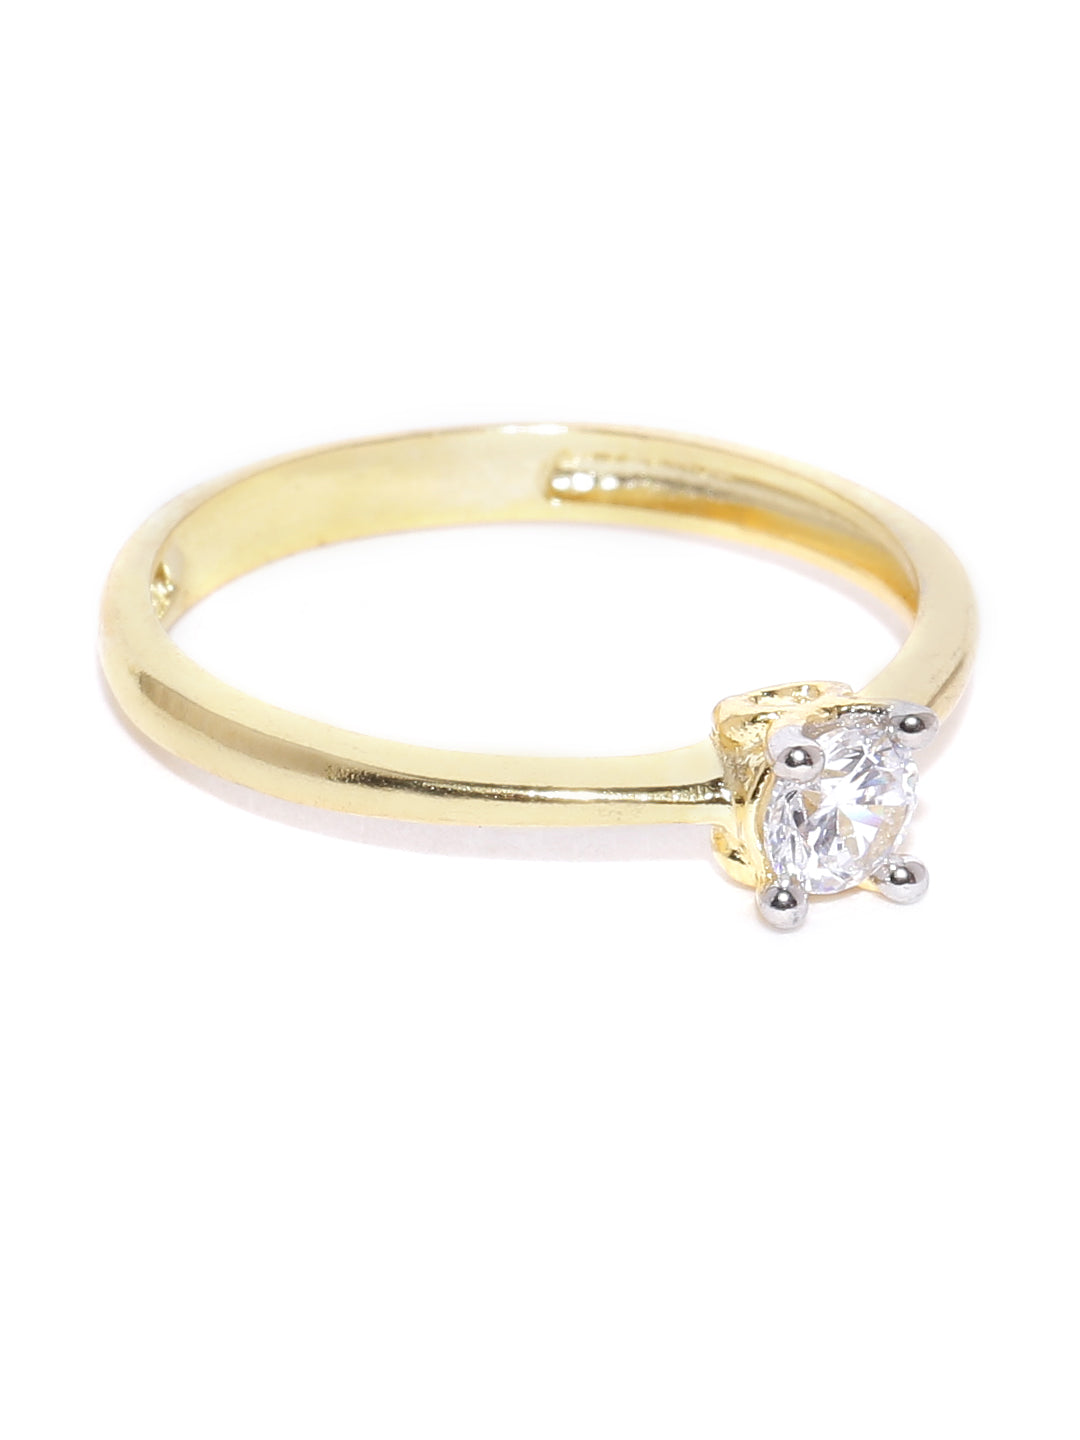 1 G Gold Ring Jewellery - 186 Latest 1 G Gold Ring Jewellery Designs @ Rs  3280